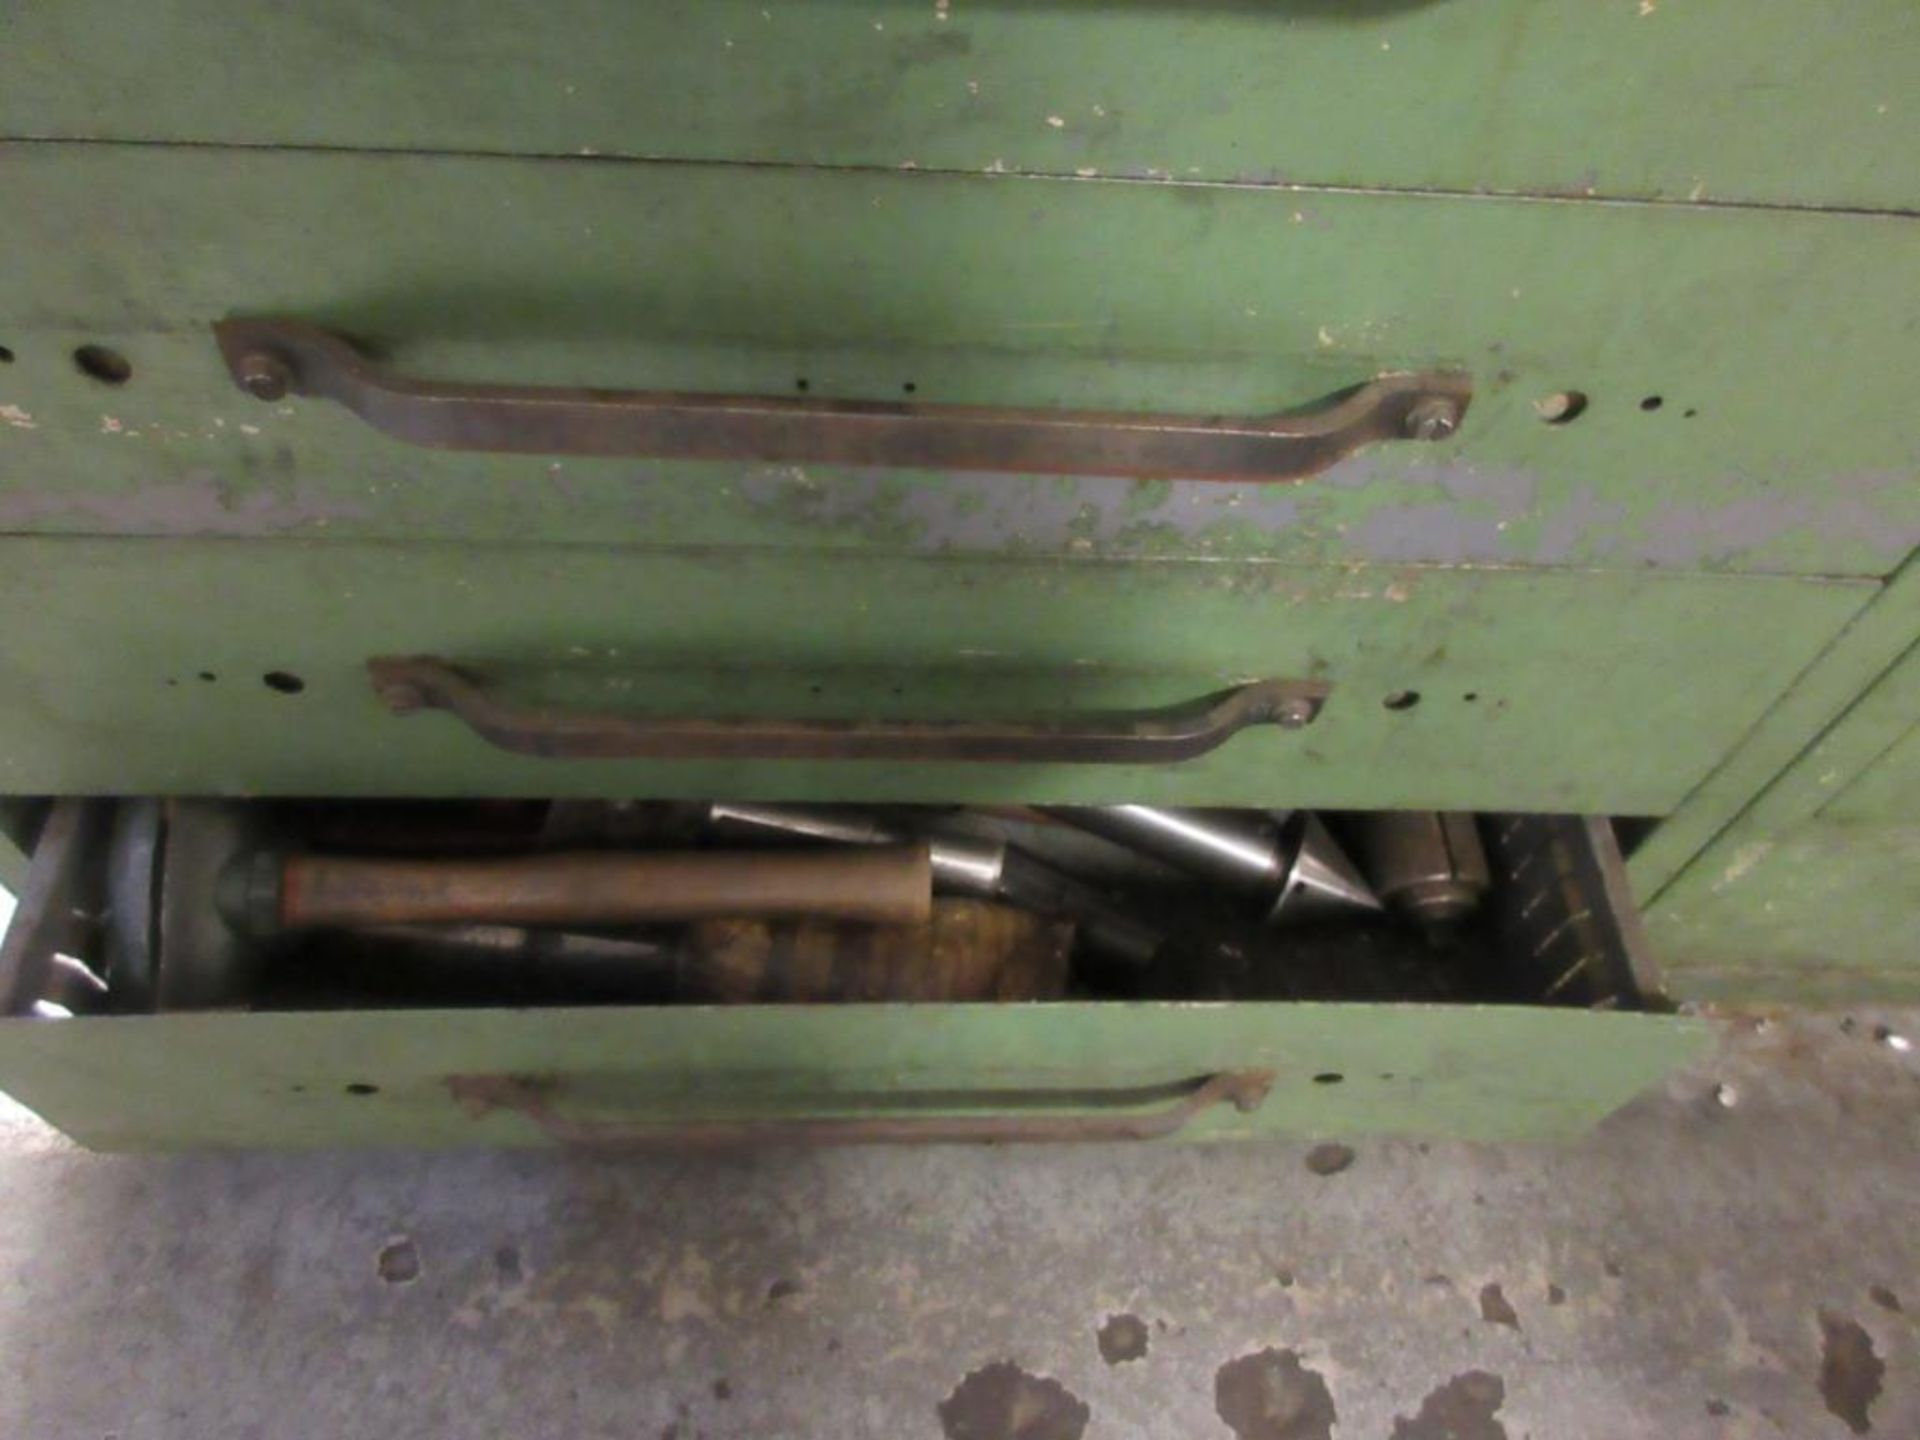 (2) VIDMAR CABINETS W/ TOOL BITS, CHUCK JAWS, DRILLS, OTHER TOOLING - Image 6 of 10